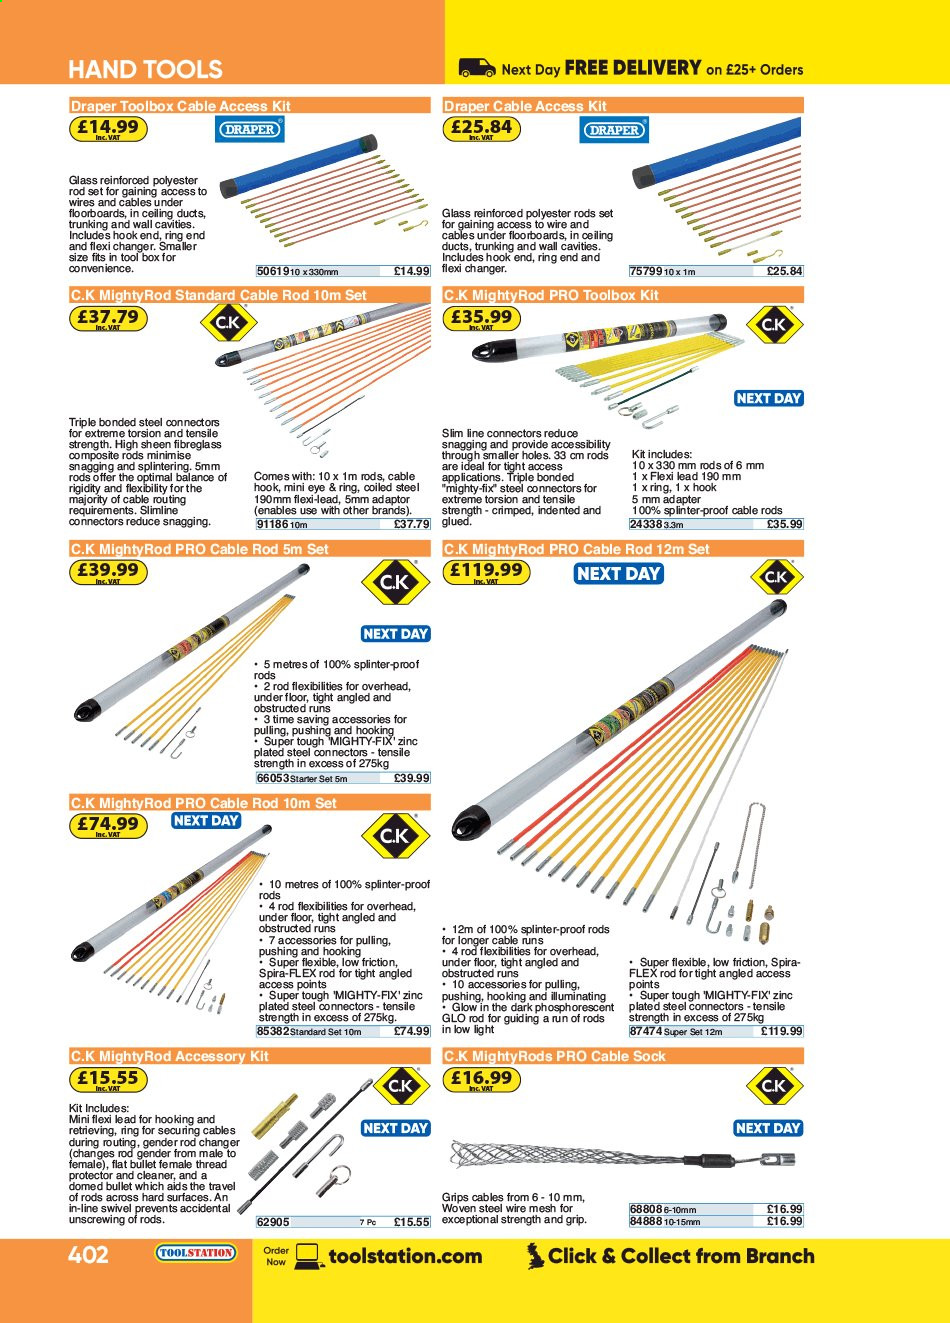 Toolstation offer . Page 402.